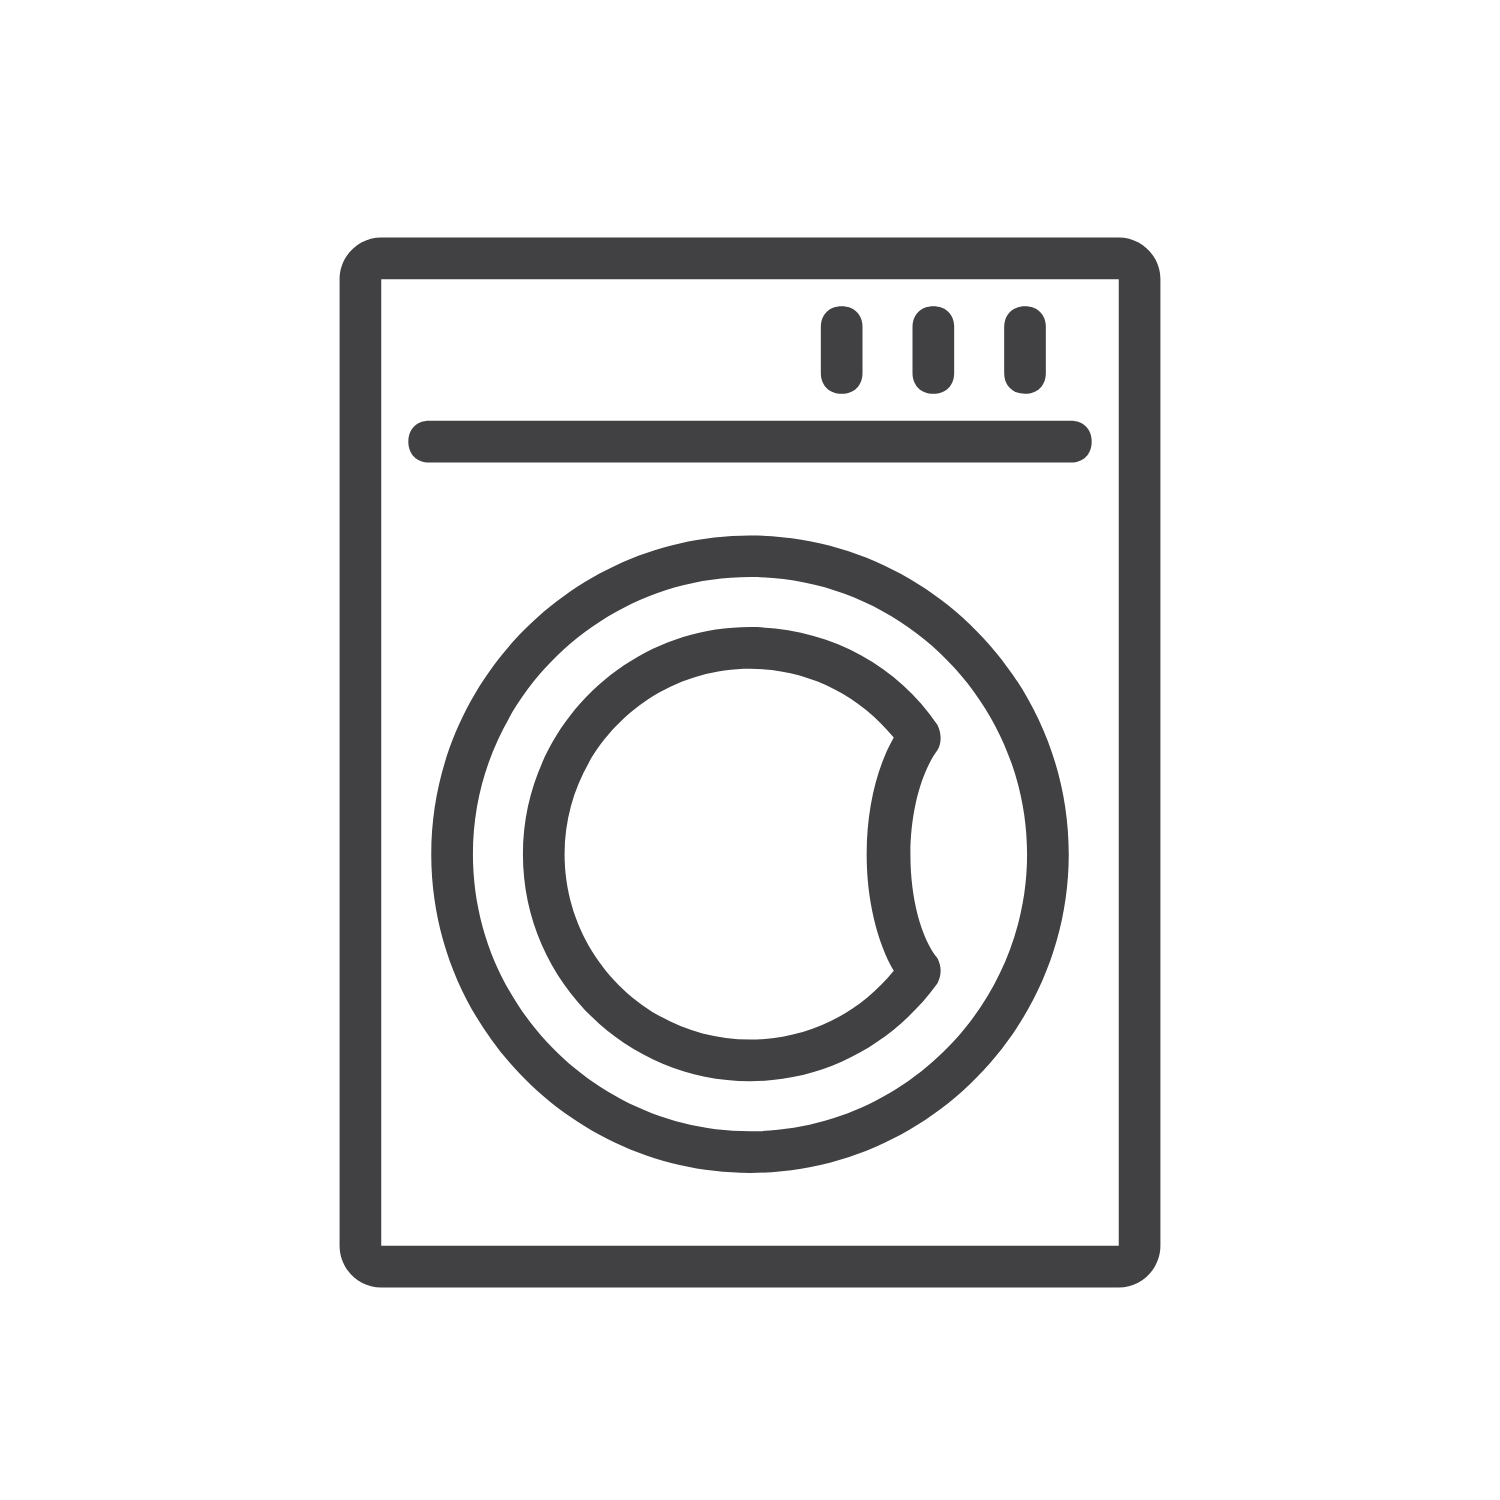 Full-sized, in-unit<br />washer & dryer